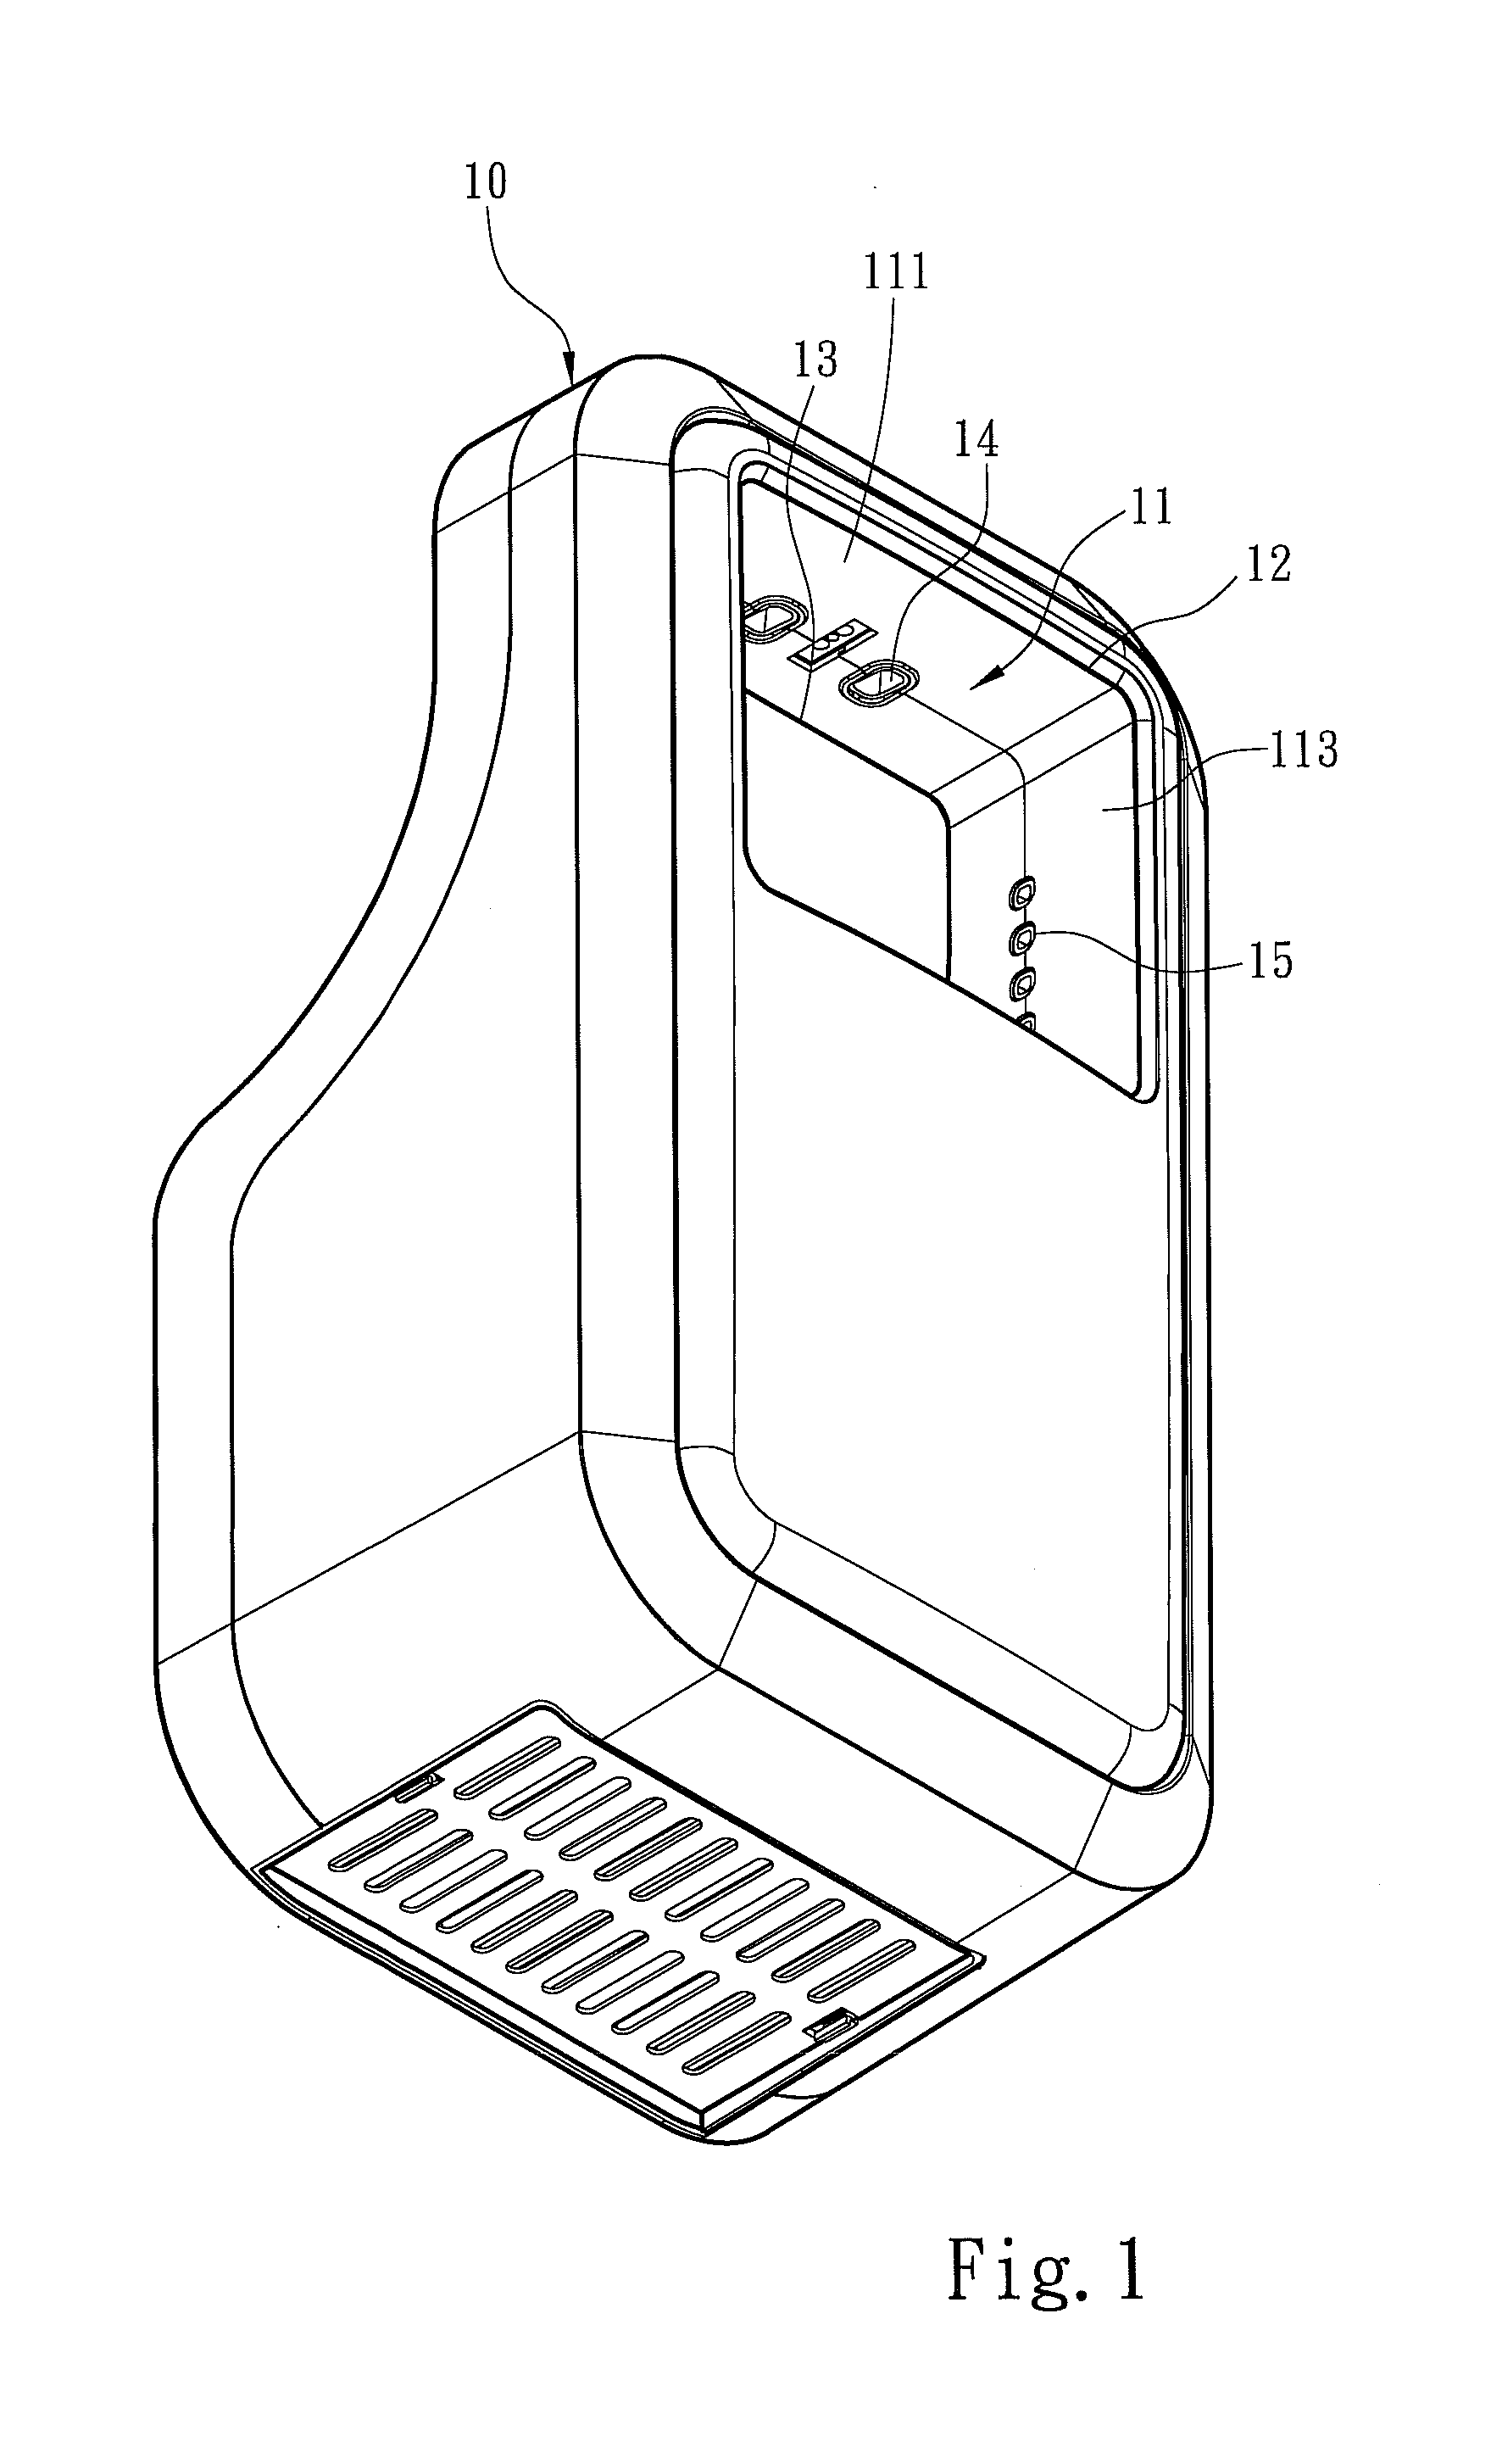 Multidirectional air discharge hand drying apparatus